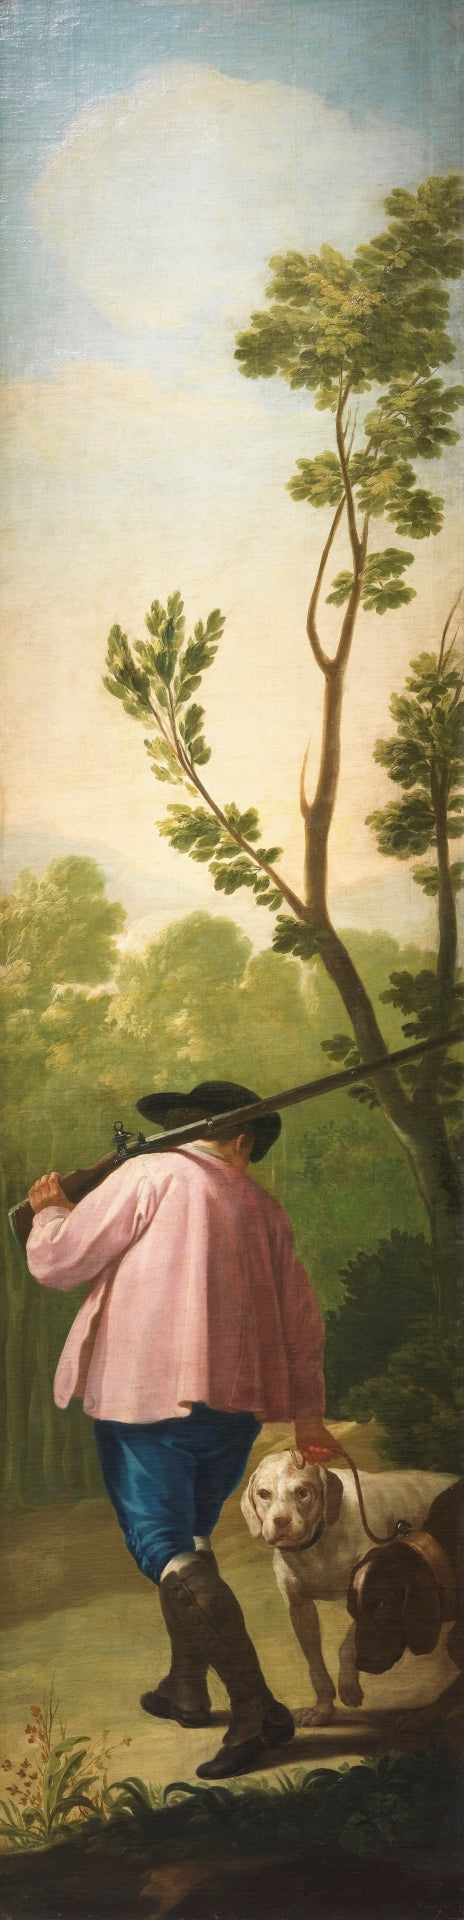 Dogs on a Leash, 1775 by Francisco Goya, Reproduction Painting